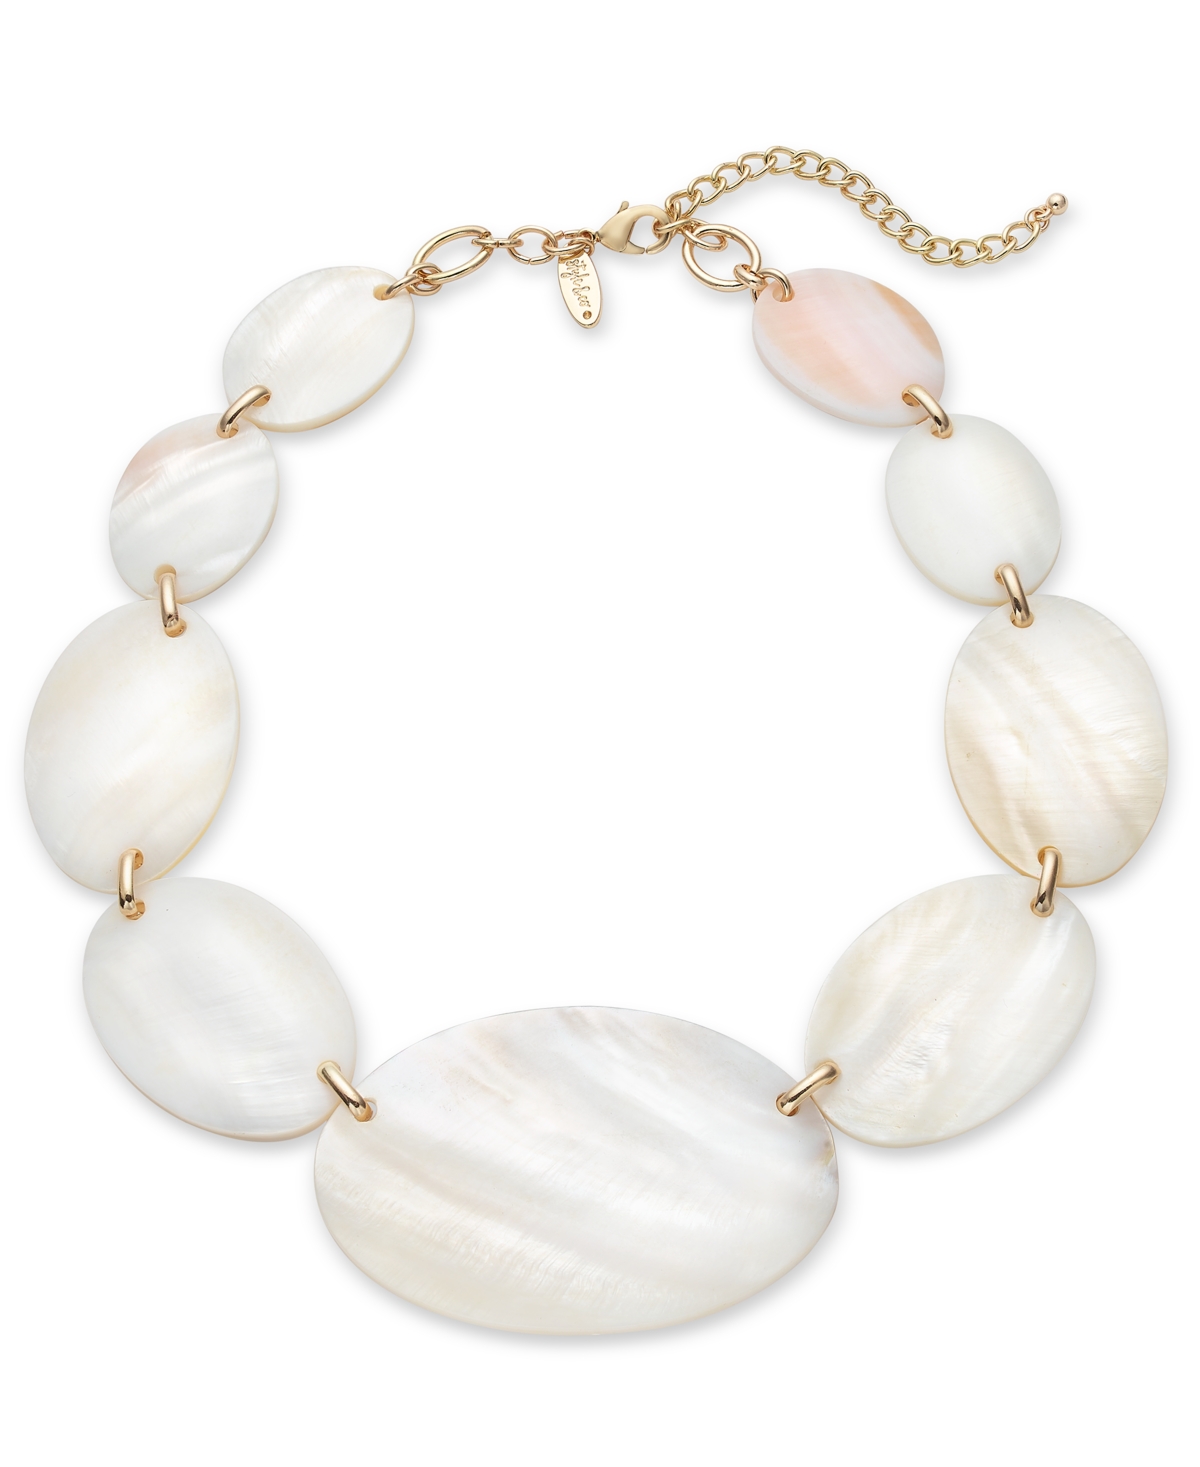 Gold-Tone Rivershell Statement Necklace, 18-1/2" + 3" extender, Created for Macy's - White